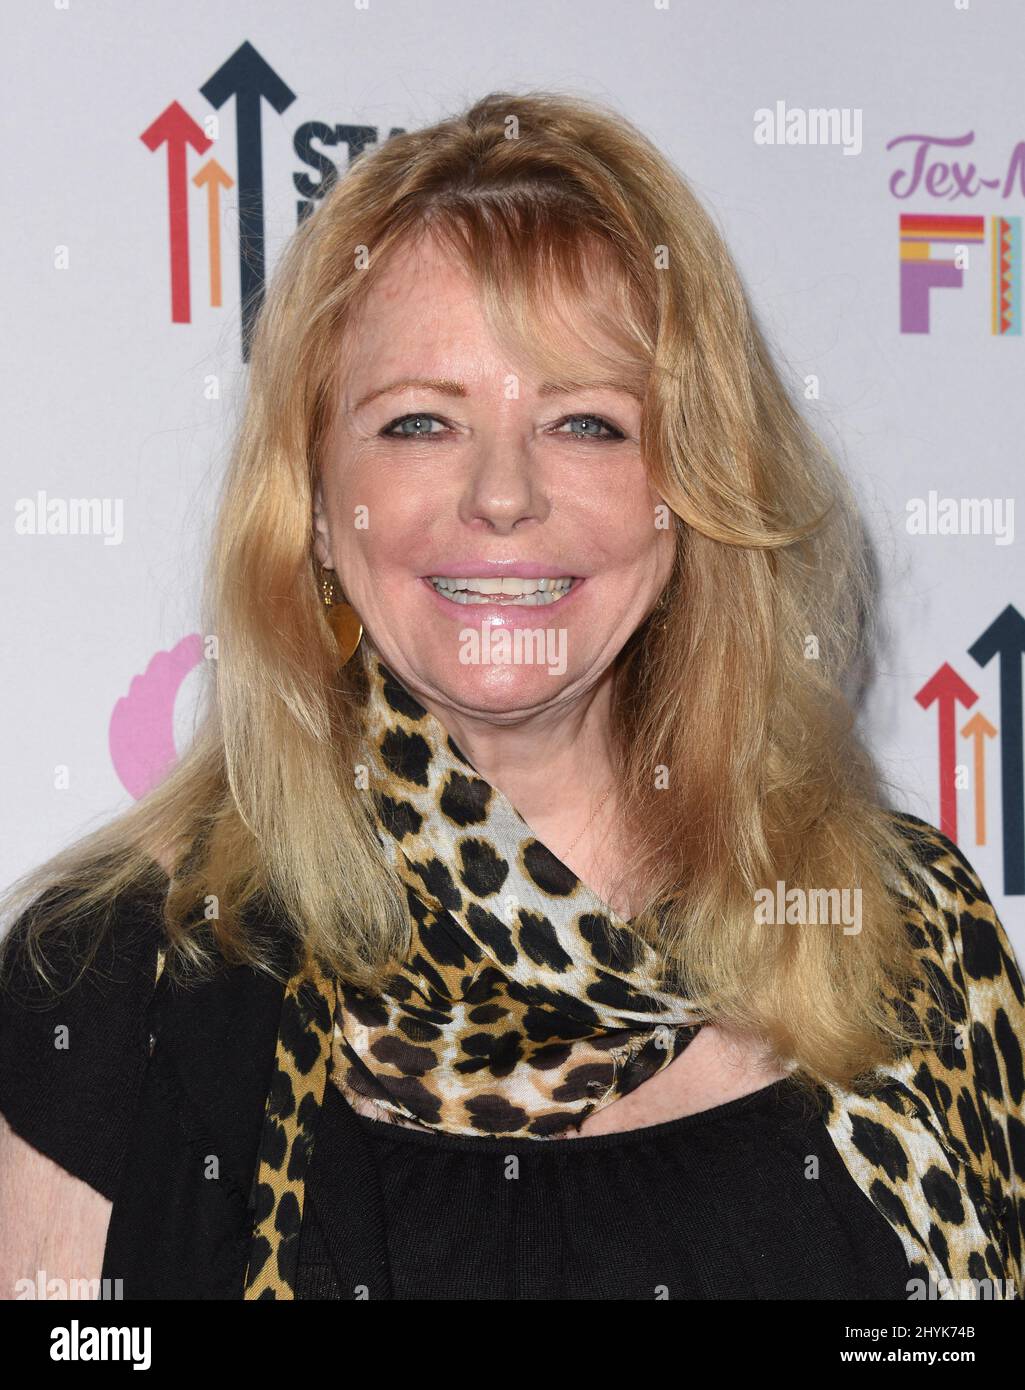 Cheryl Tiegs at The Farrah Fawcett Foundation's Tex-Mex Fiesta held at the Wallis Annenberg Center for the Performing Arts on September 6, 2019 in Beverly Hills, USA. Stock Photo